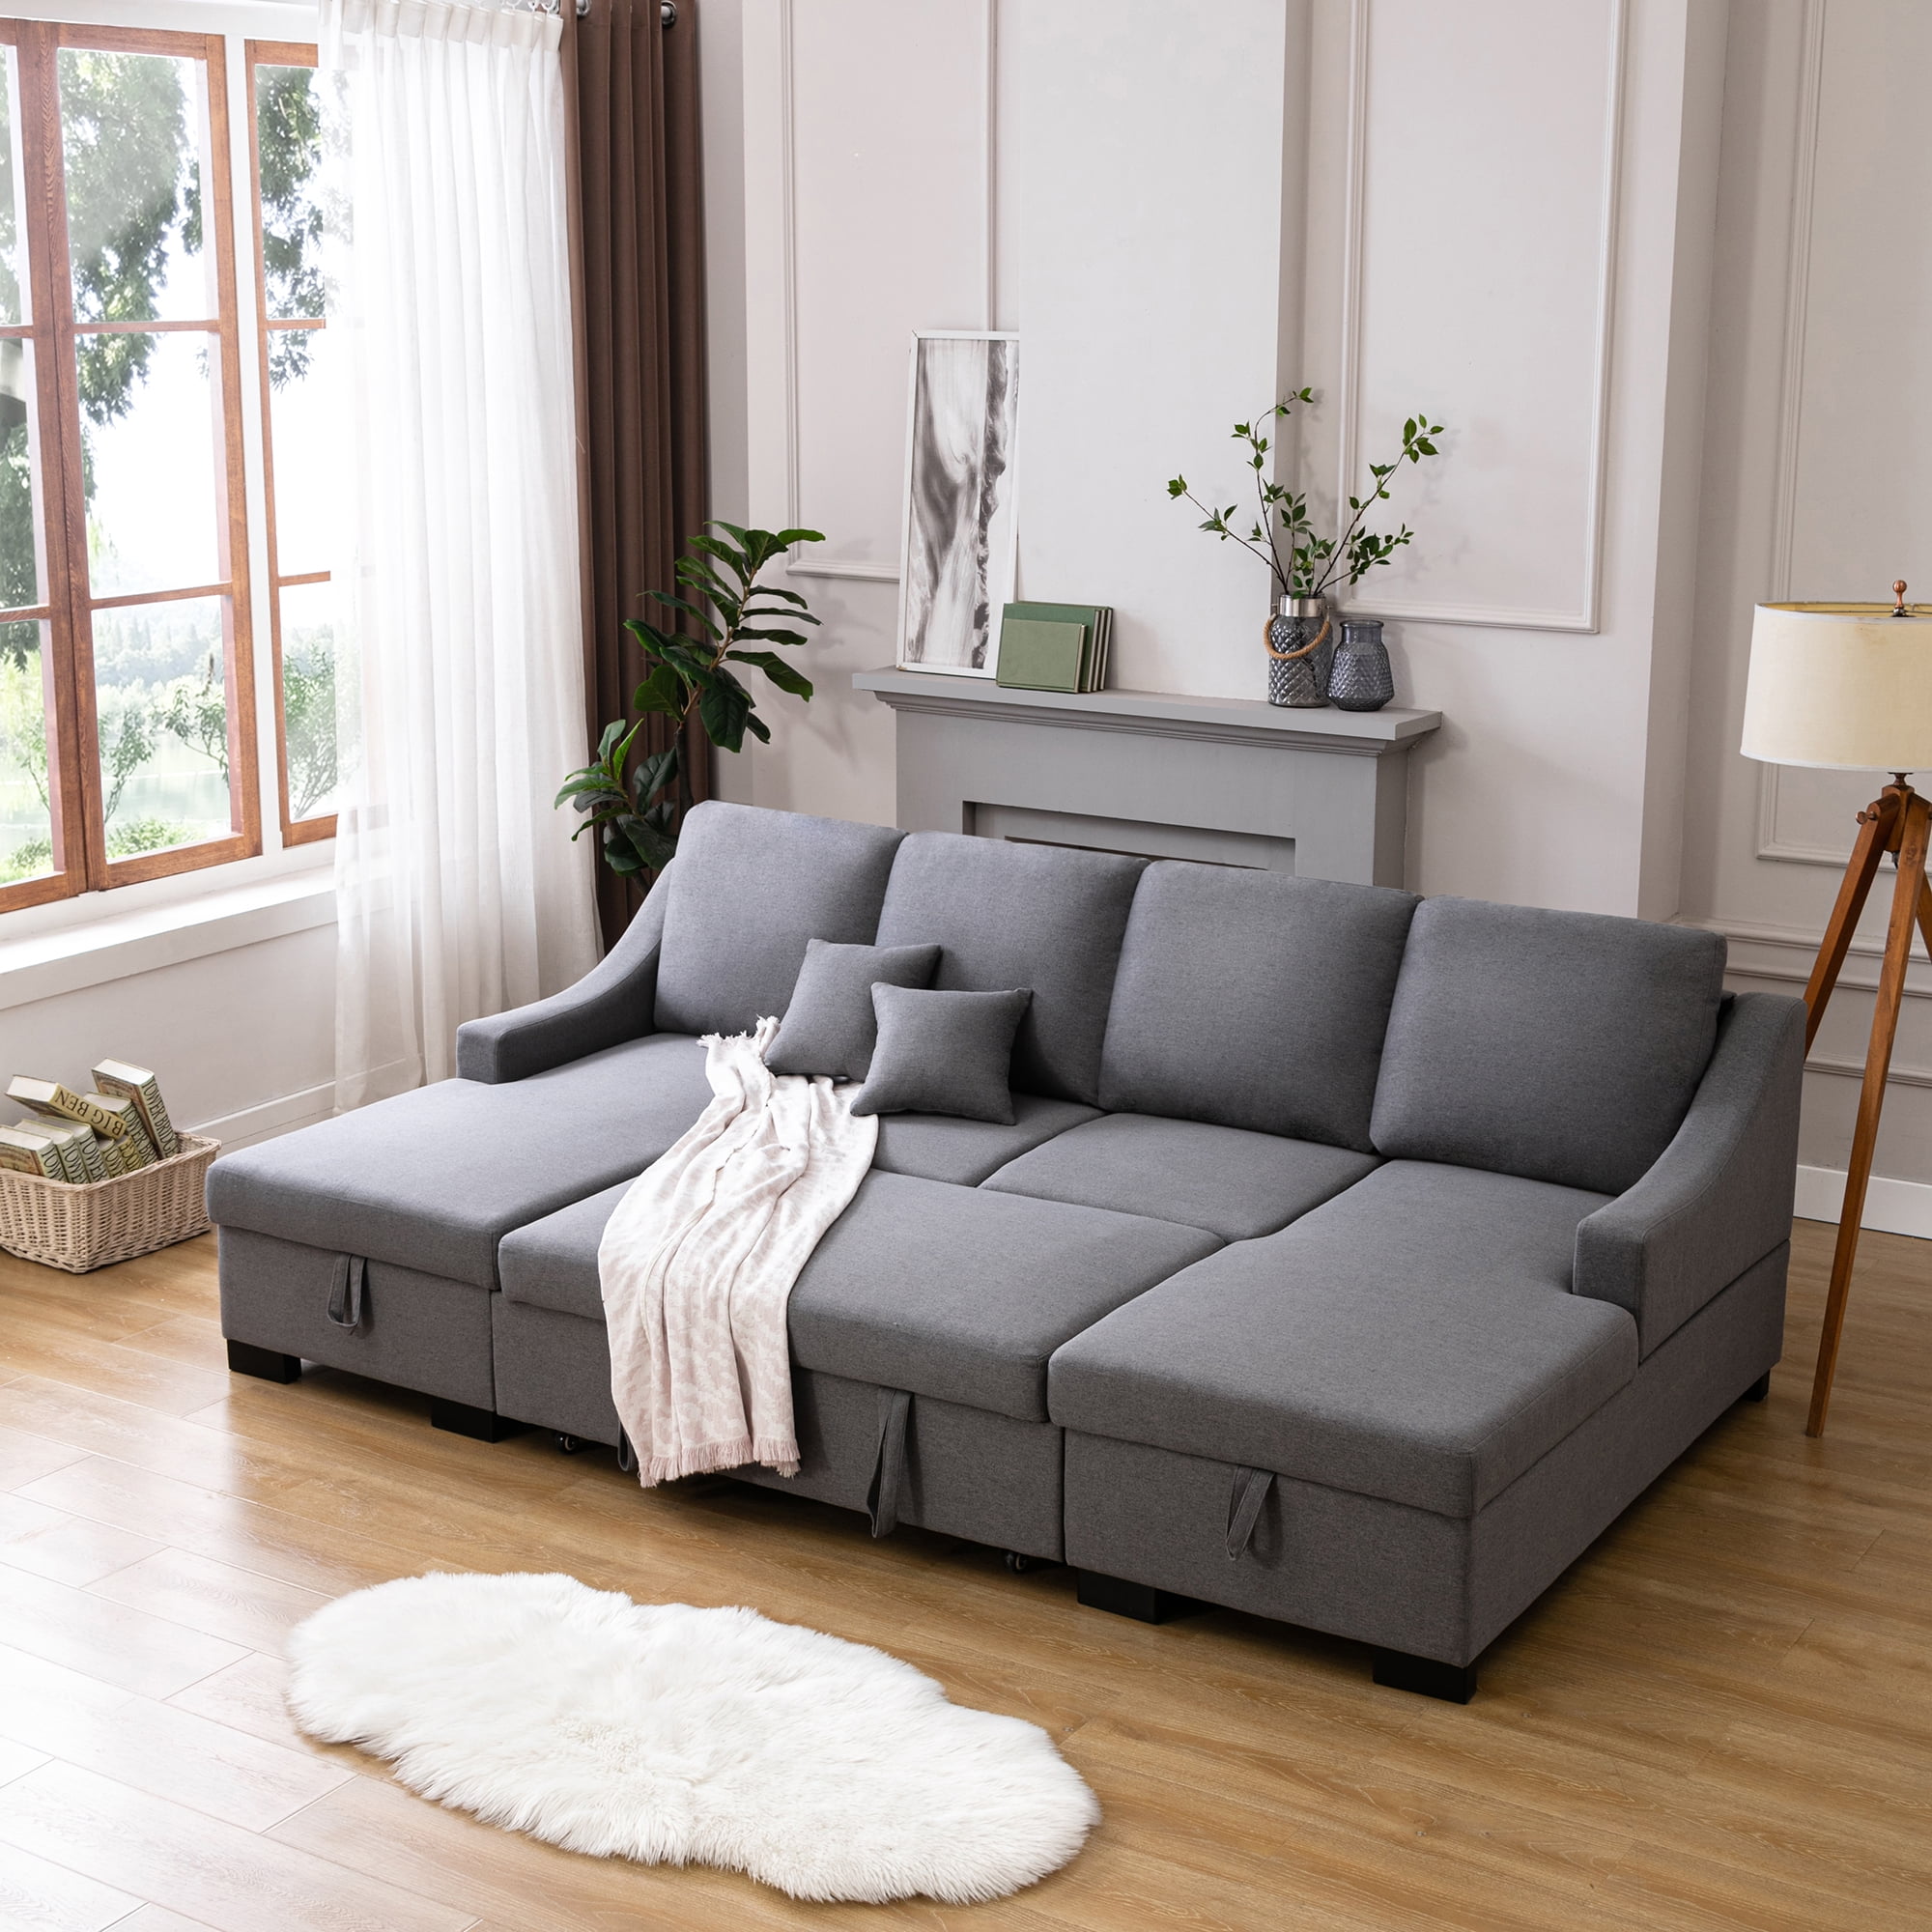 Churanty Pull Out Sofa Bed U Shaped Sectional Sleeper Sofa Bed with Storage  Chaise for Living Room Apartment,Grey